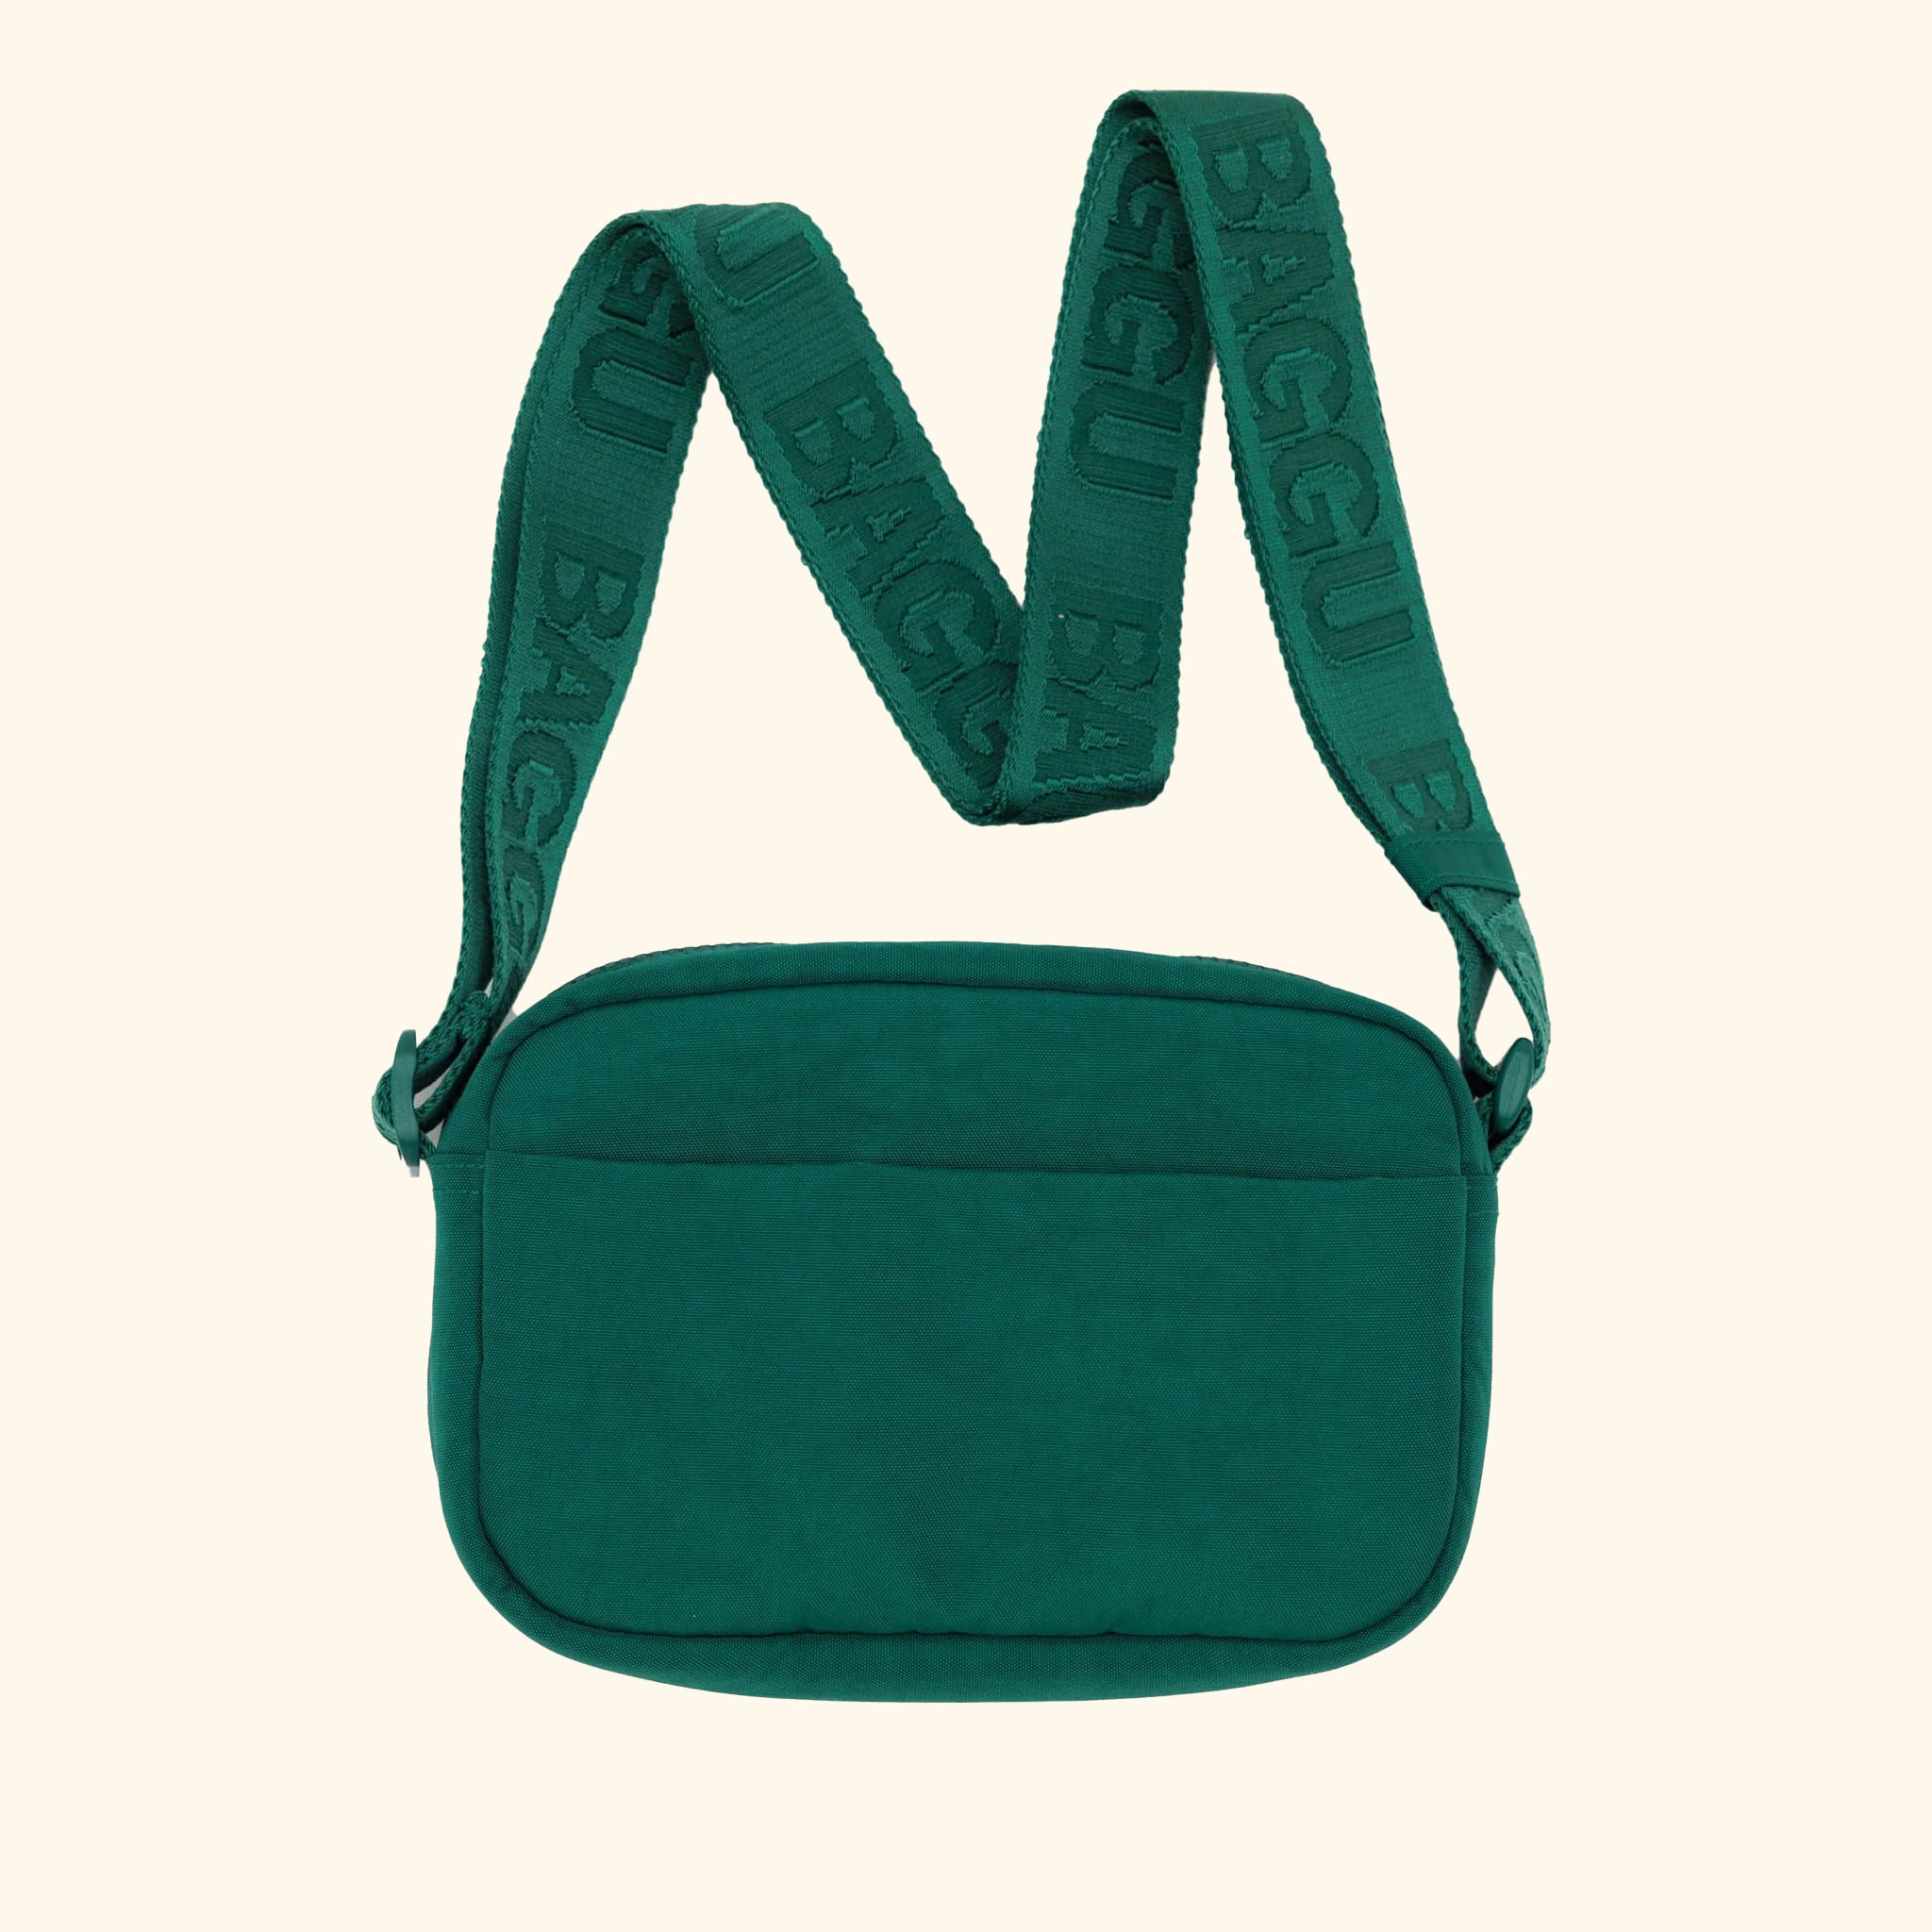 A green crossbody bag made of nylon with an adjustable strap. 